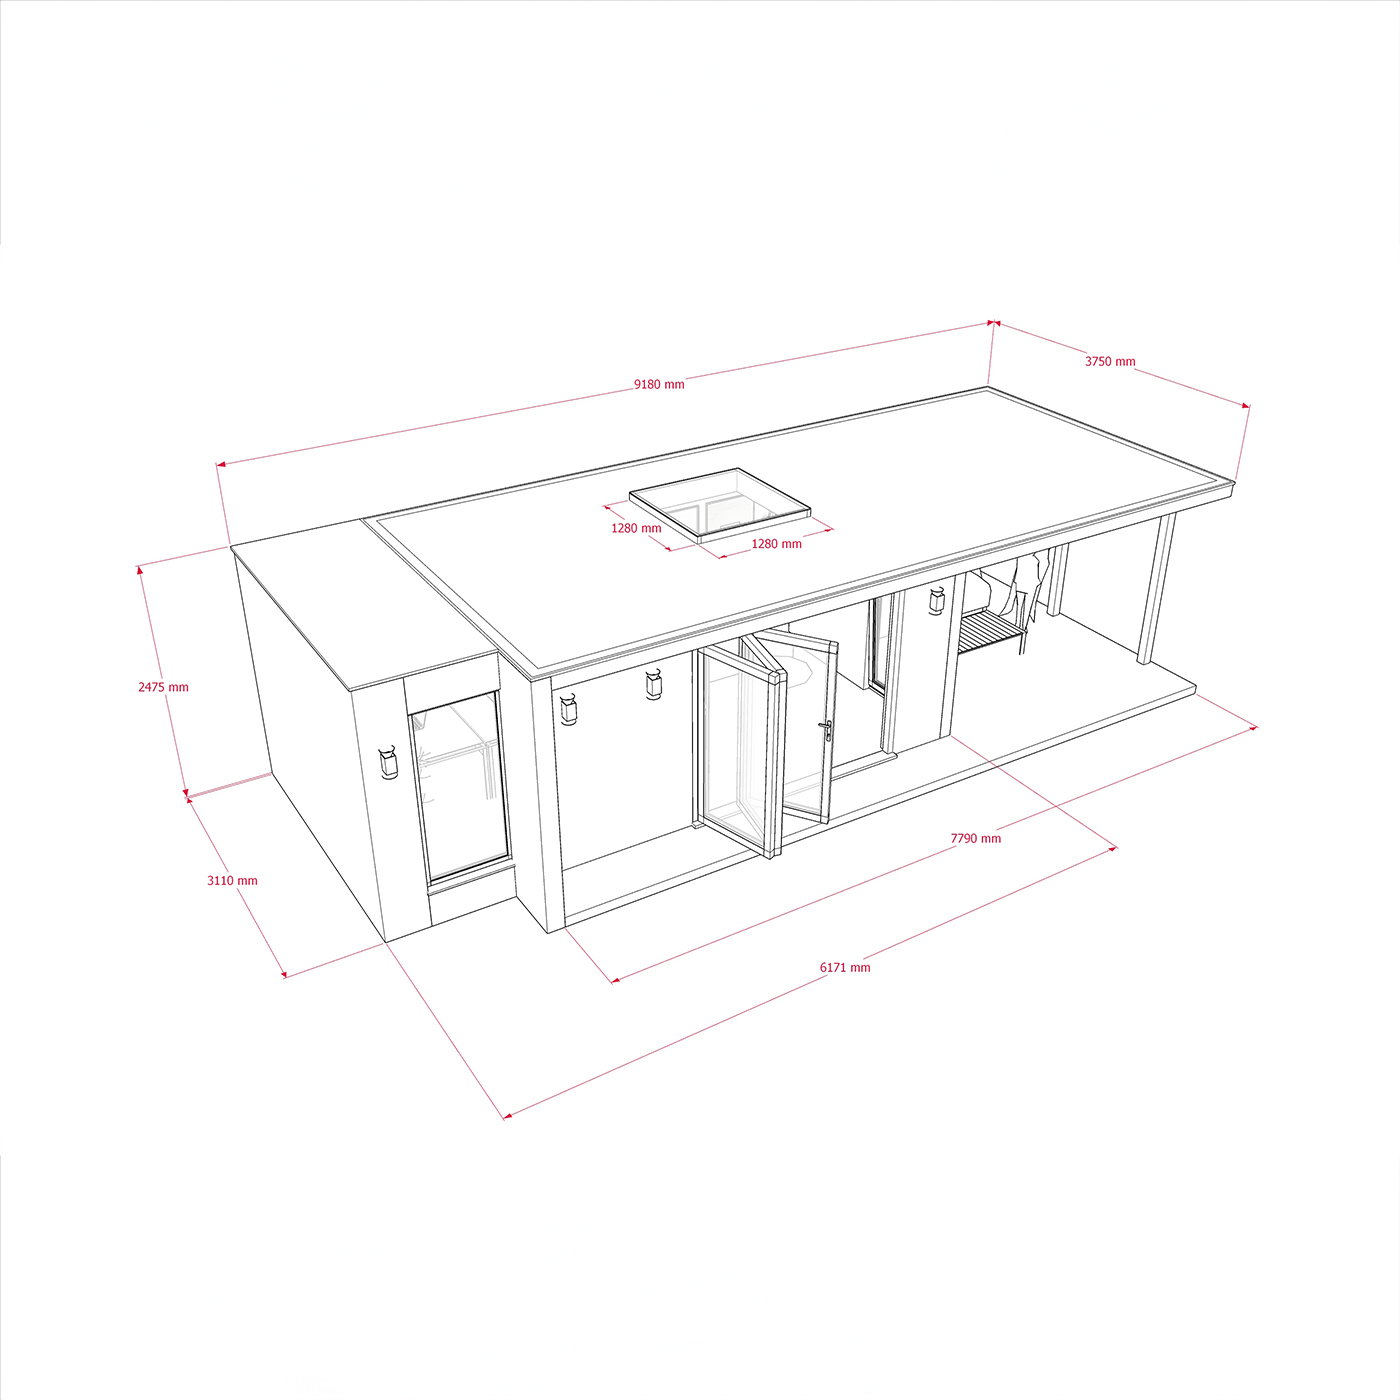 Exterior dimensions for 3.0m by 6.2m garden office